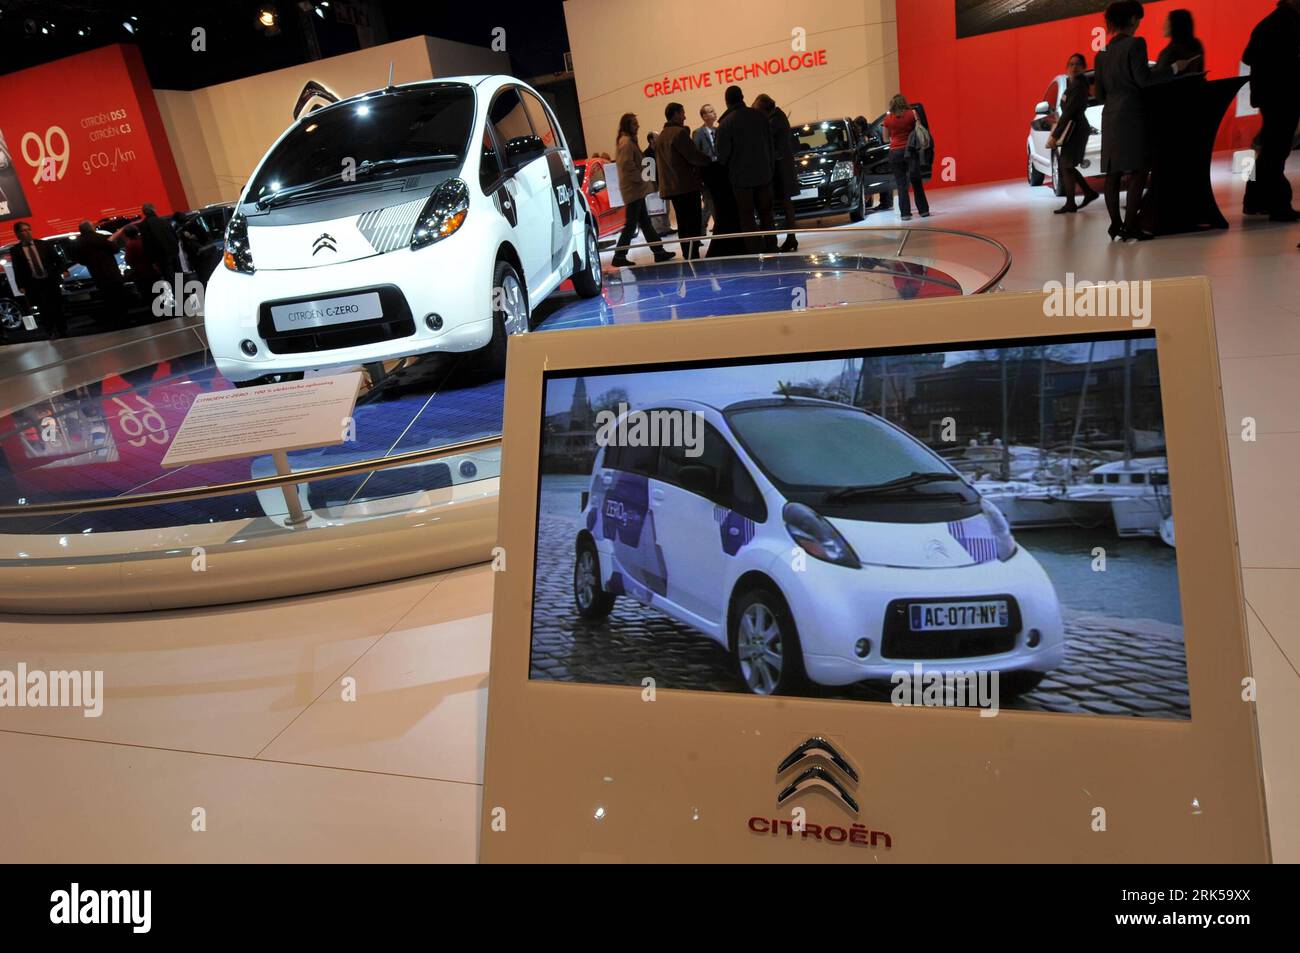 Bildnummer: 53727426  Datum: 14.01.2010  Copyright: imago/Xinhua (100114) -- BRUSSELS, Jan. 14, 2010 (Xinhua) -- Electric powered car C-Zero of Citroen is exhibited at the 88th edition of the European Motor Show in Brussels, capital of Belgium, Jan. 14, 2010. The 88th edition of the European Motor Show kicked off here on Thursday with various eco-friendly cars on exhibition. (Xinhua/Wu Wei) (zw) (1)BELGIUM-BRUSSELS-MOTOR SHOW-OPENING PUBLICATIONxNOTxINxCHN Motorshow Wirtschaft Auto Automobilindustrie PKW Objekte Messe Ausstellung kbdig xmk 2010 quer premiumd o0 Elektroauto    Bildnummer 537274 Stock Photo